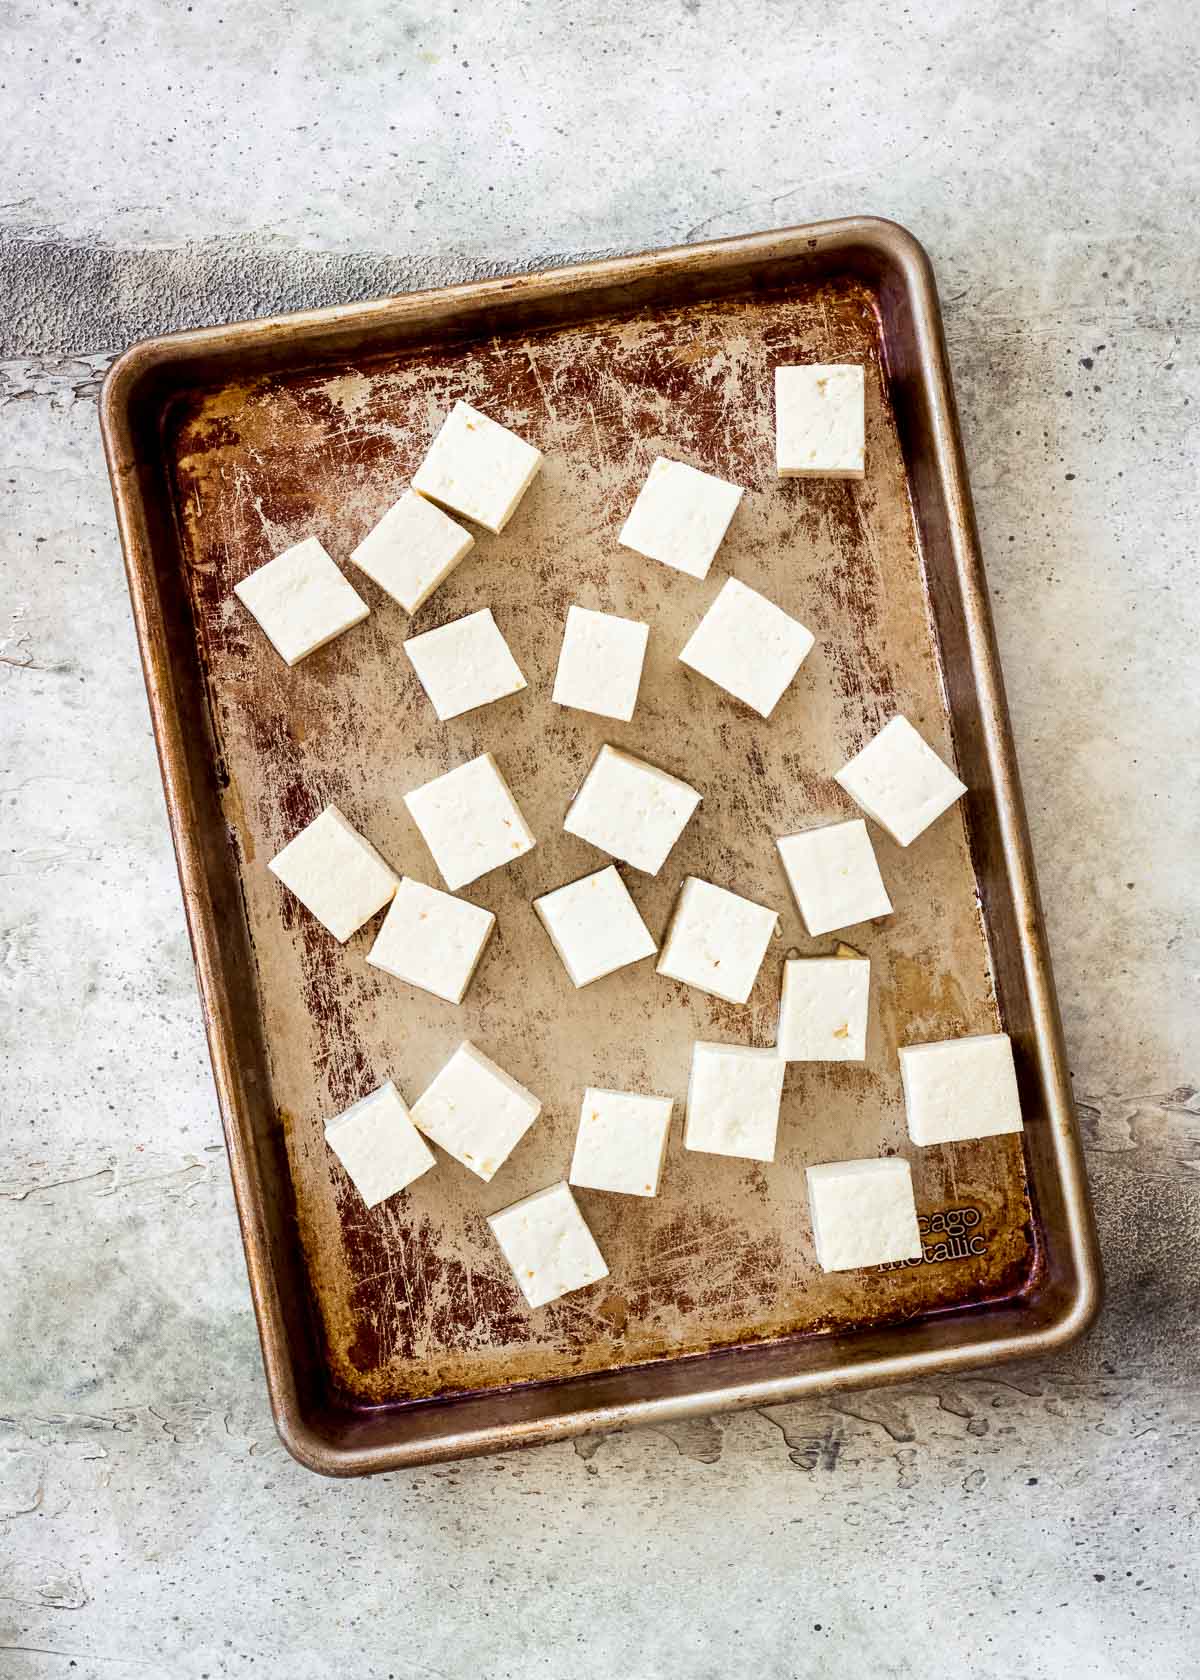 Tray of uncooked cubed tofu ready to be broiled.